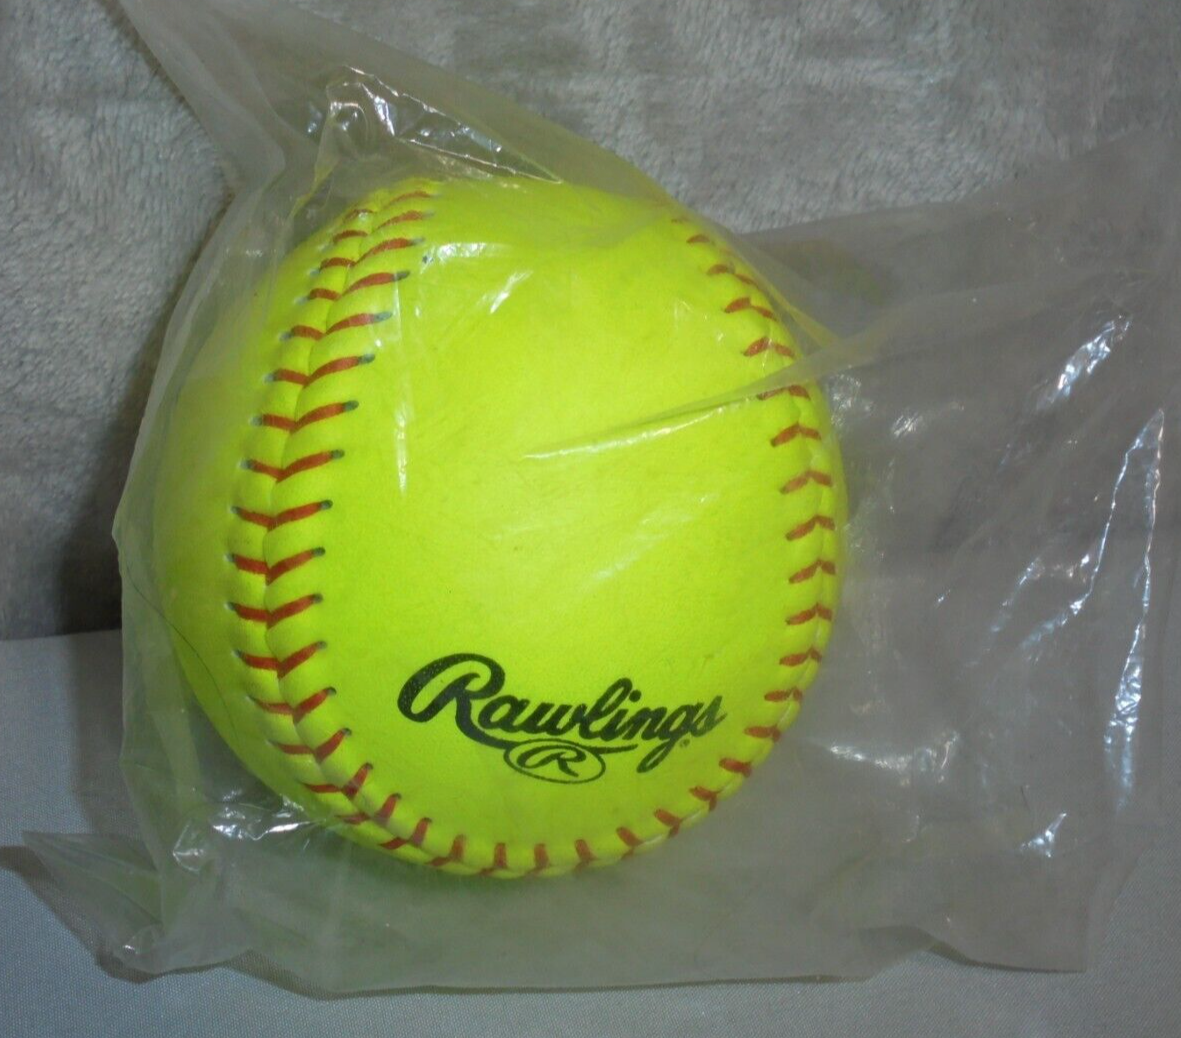 Rawlings Official League Recreational Use Fastpitch Softballs, 10 inch, 4 Count, Size: Pack of 4